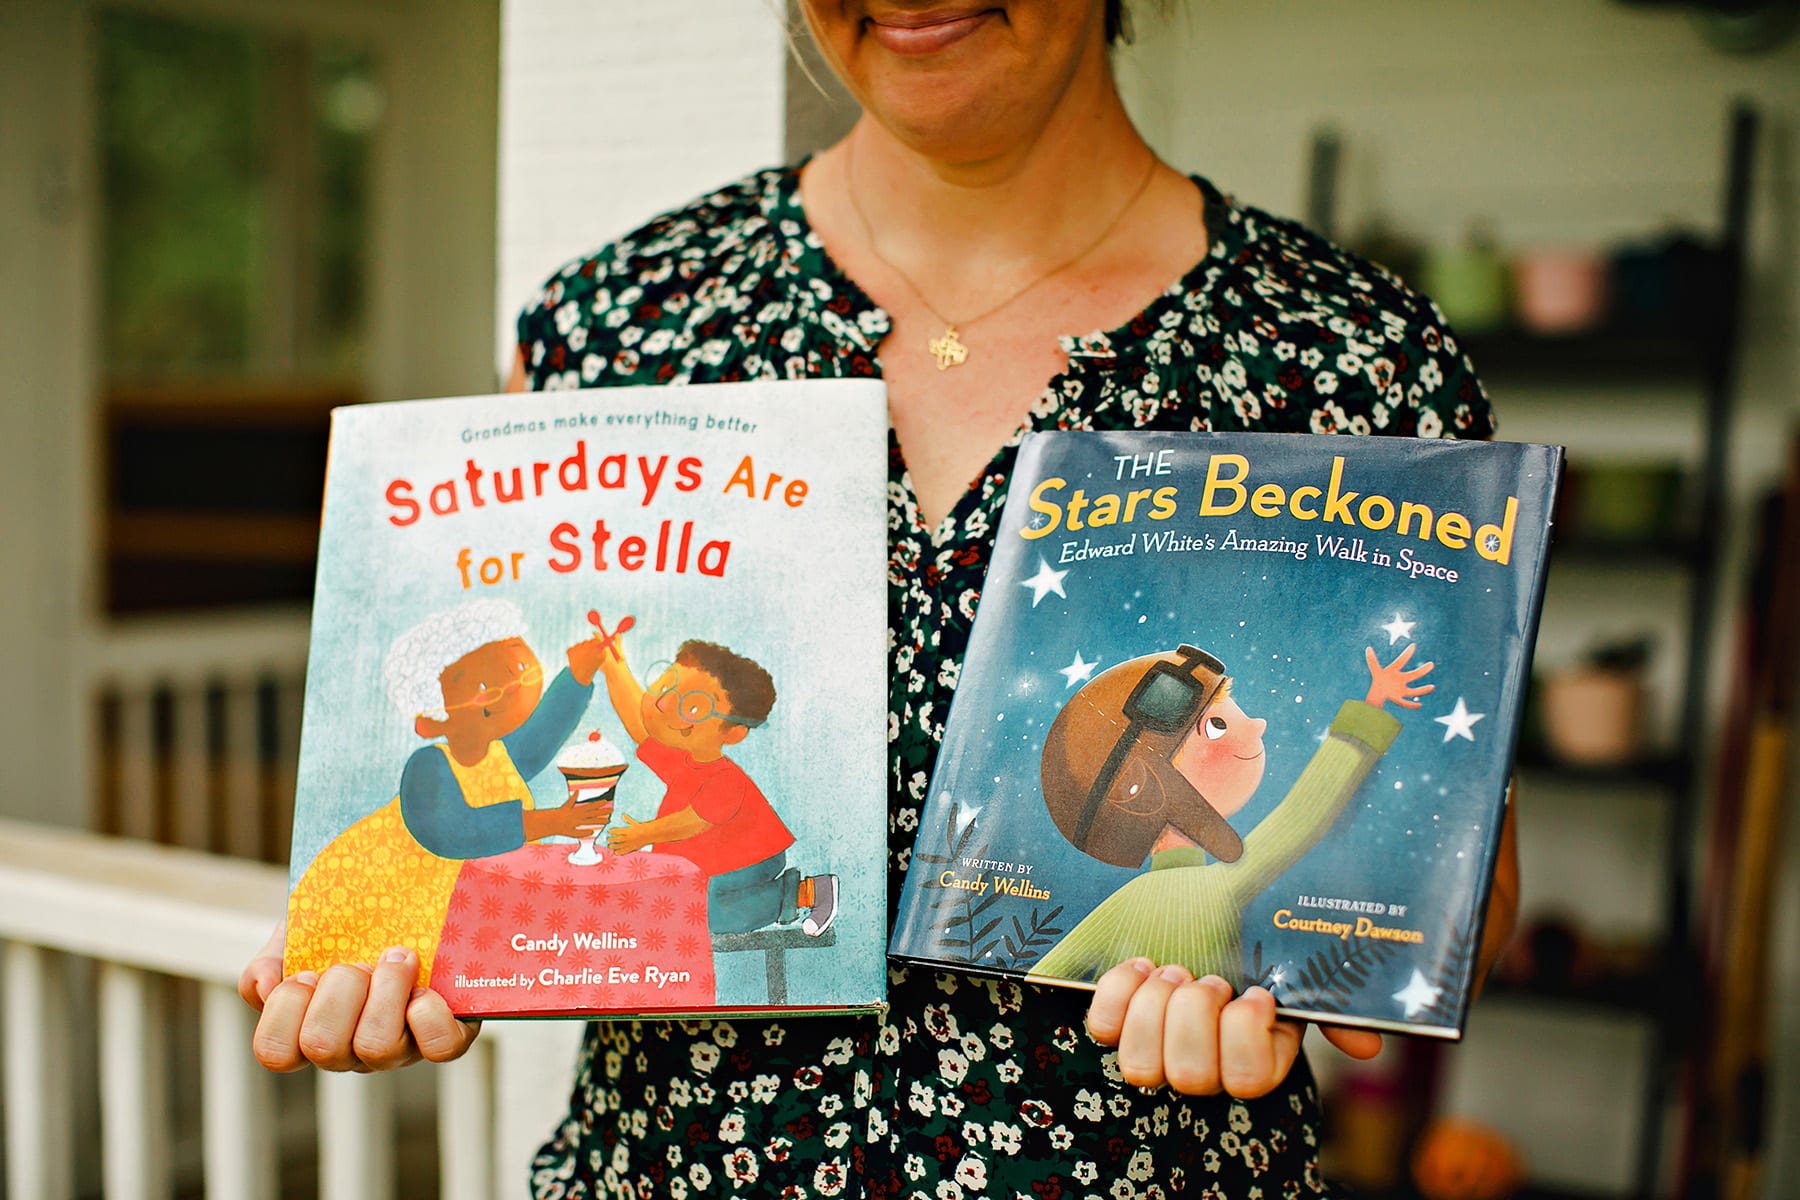 Author Candy Wellins with her books